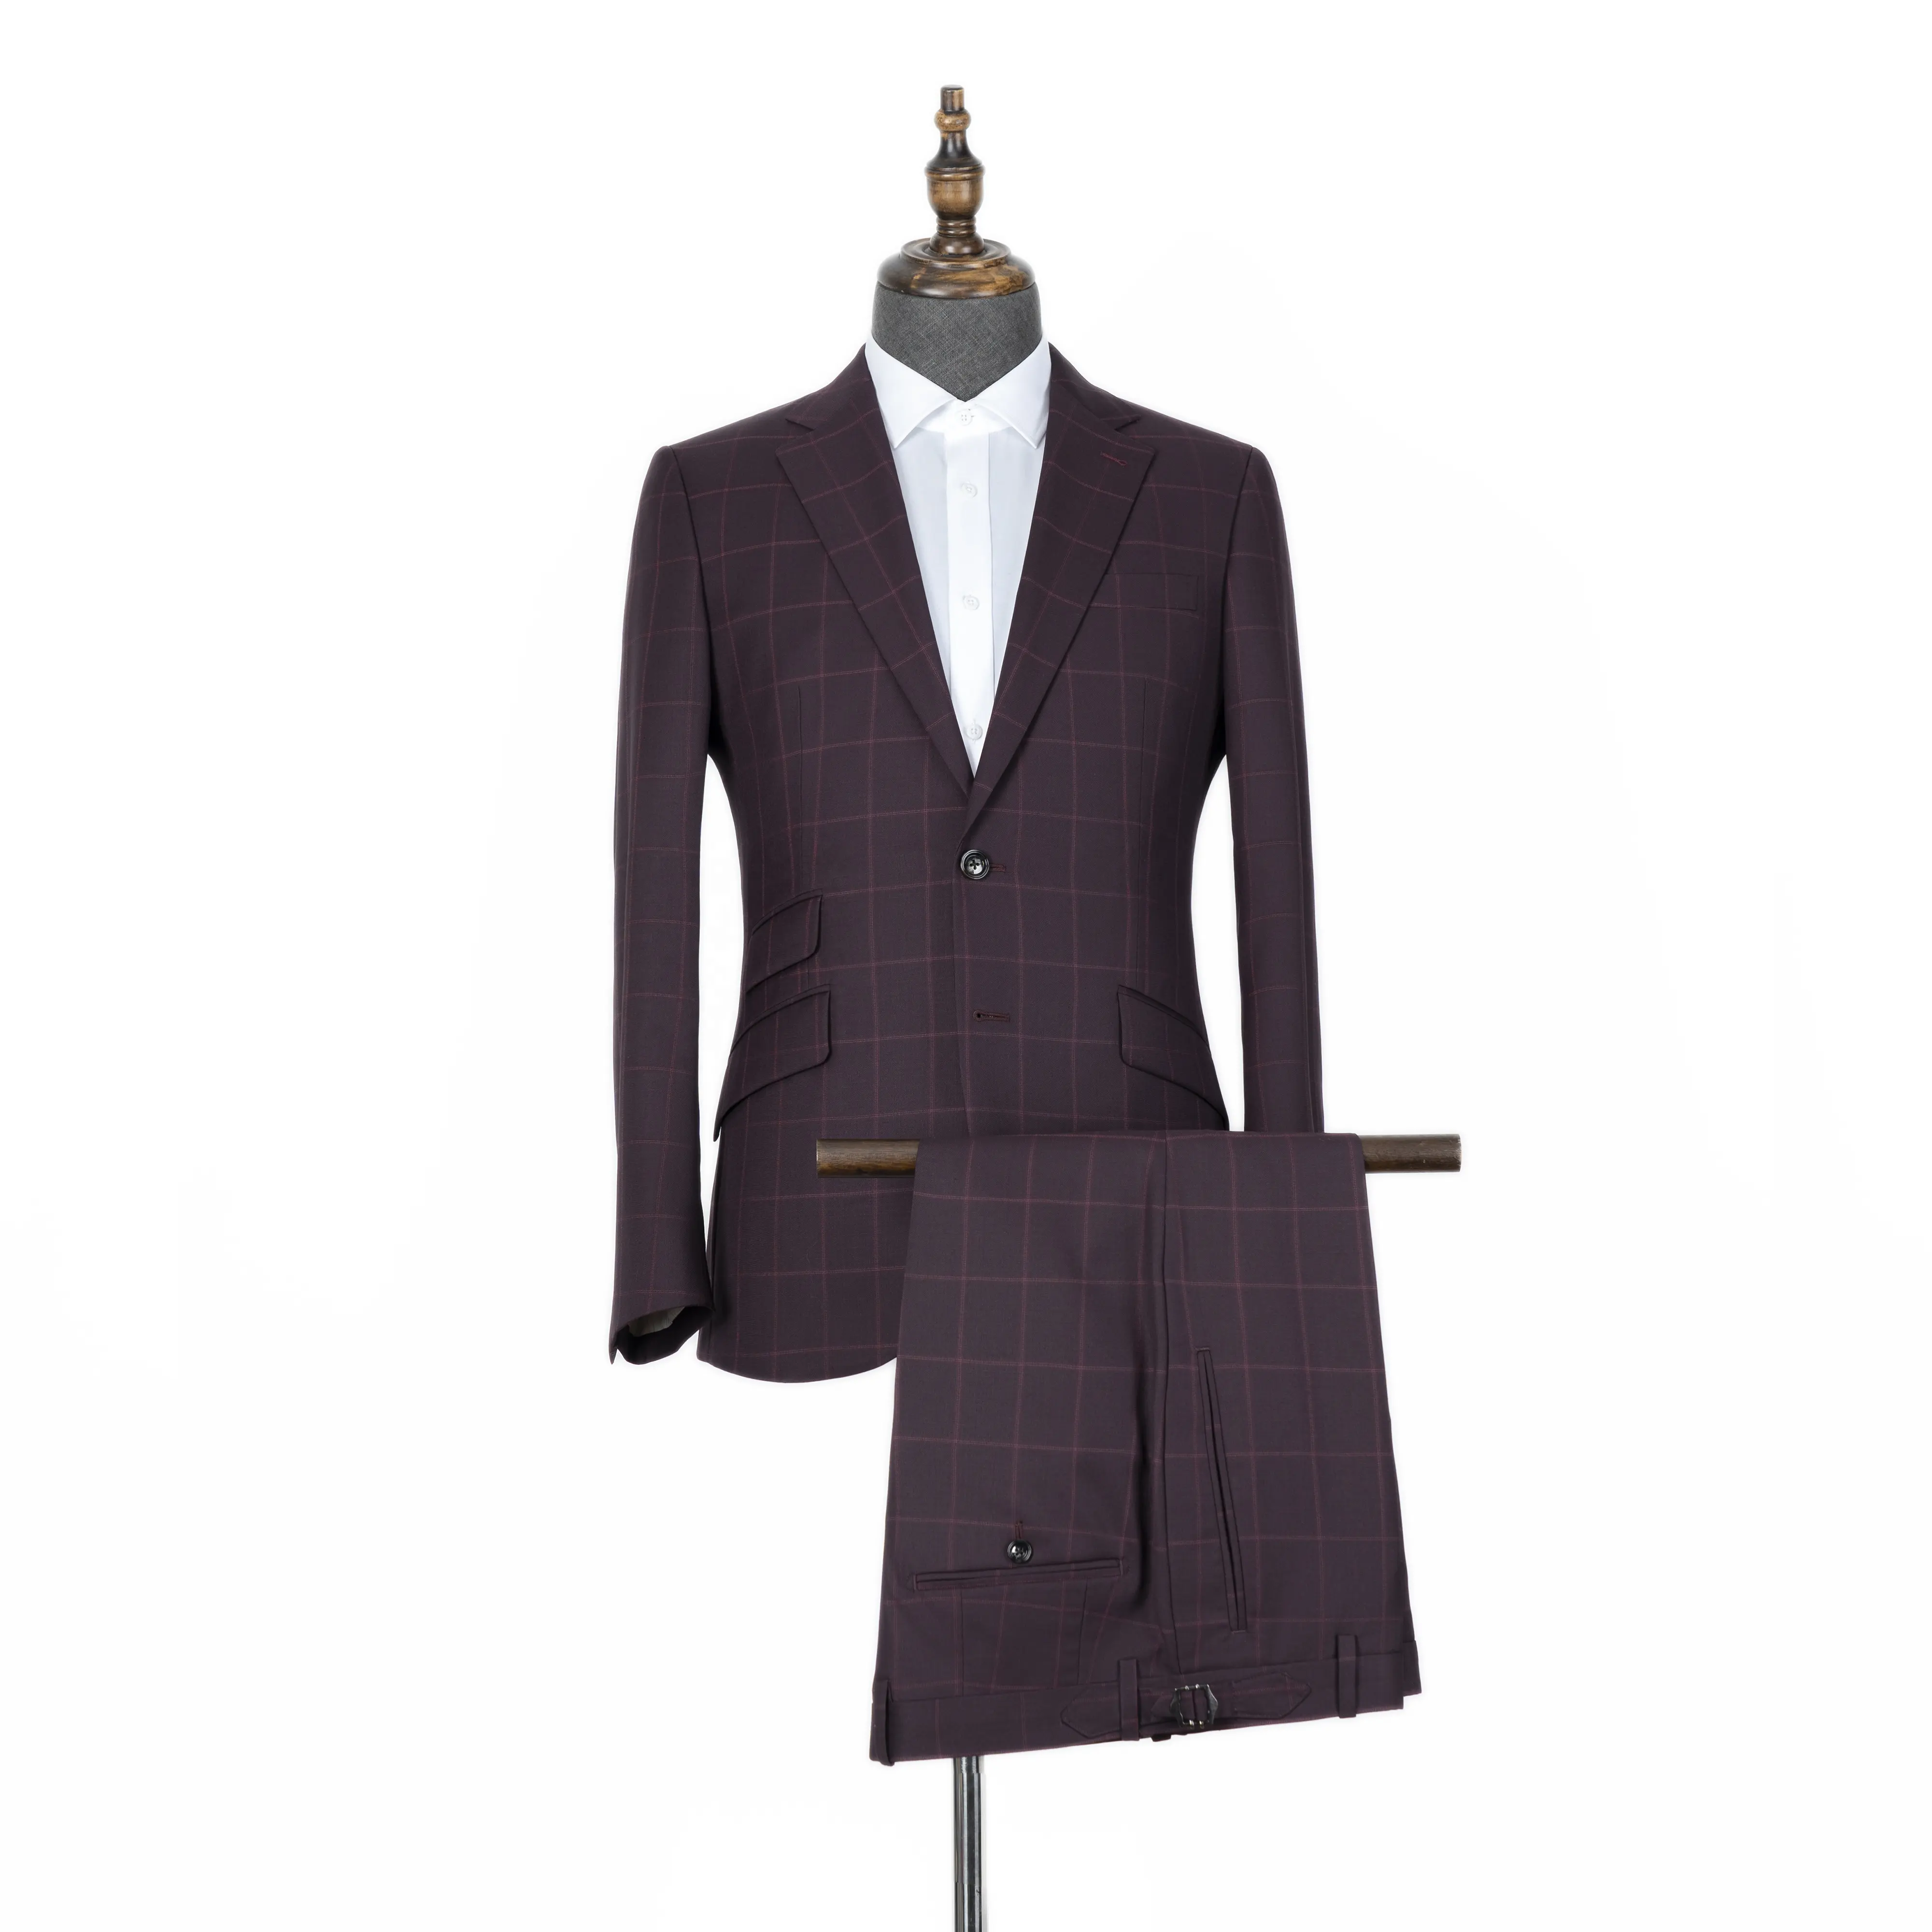 OEM MTM Factory Custom Made Wool Blending Business Casual Tailored Notch Lapel Suit For Men With Regular Fit Slim Fit